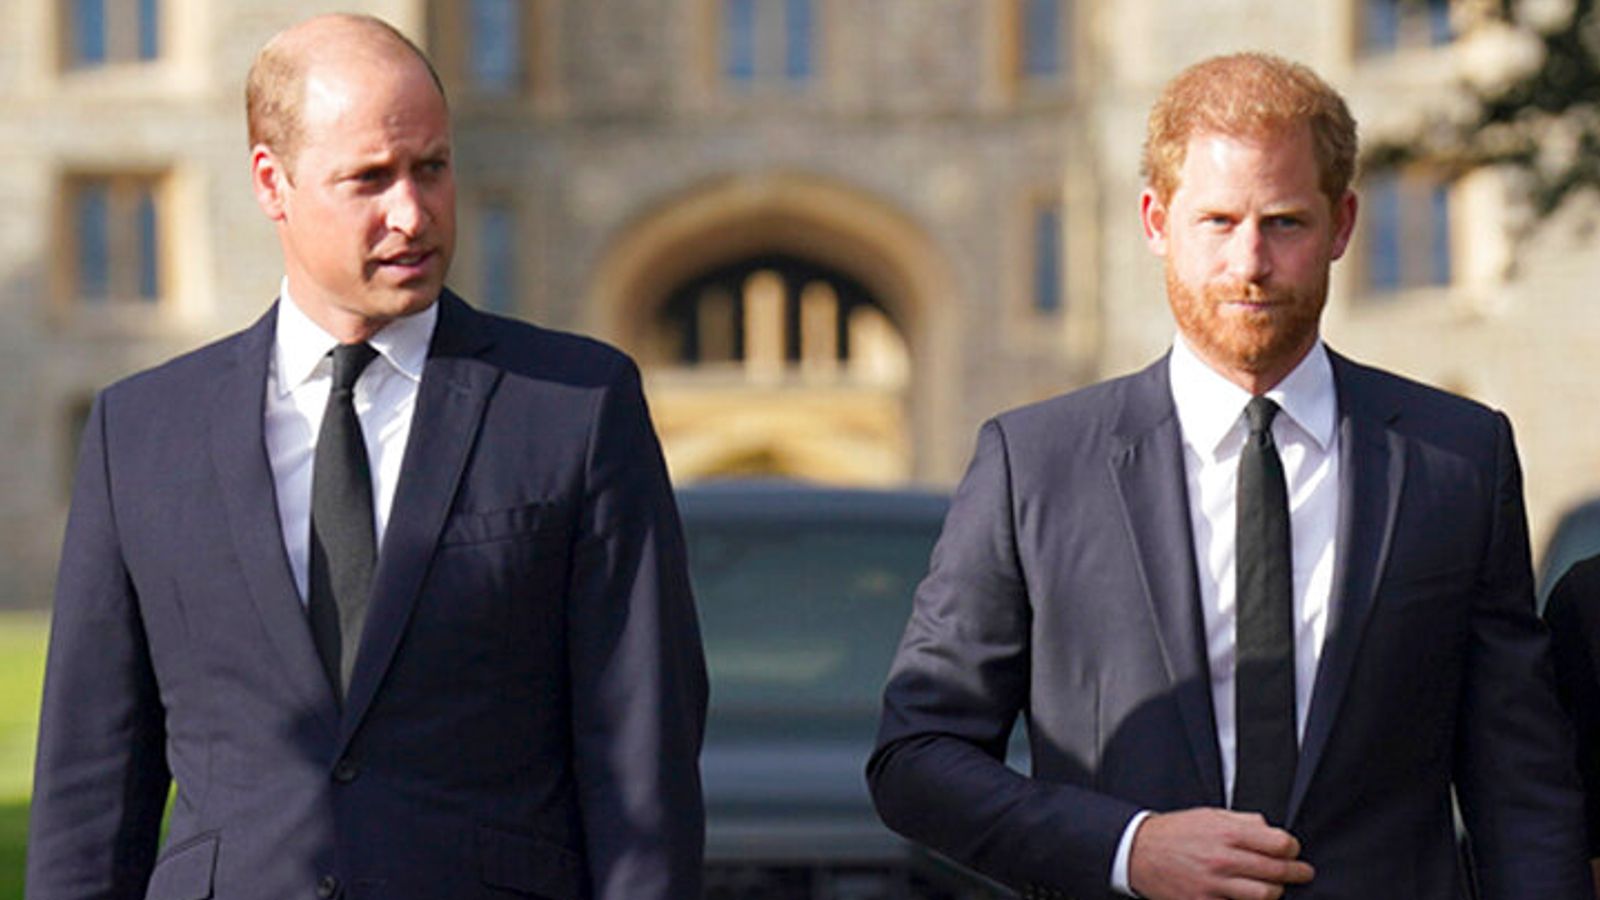 'He wanted me to hit him back': Prince Harry claims he saw 'red mist' in Prince William